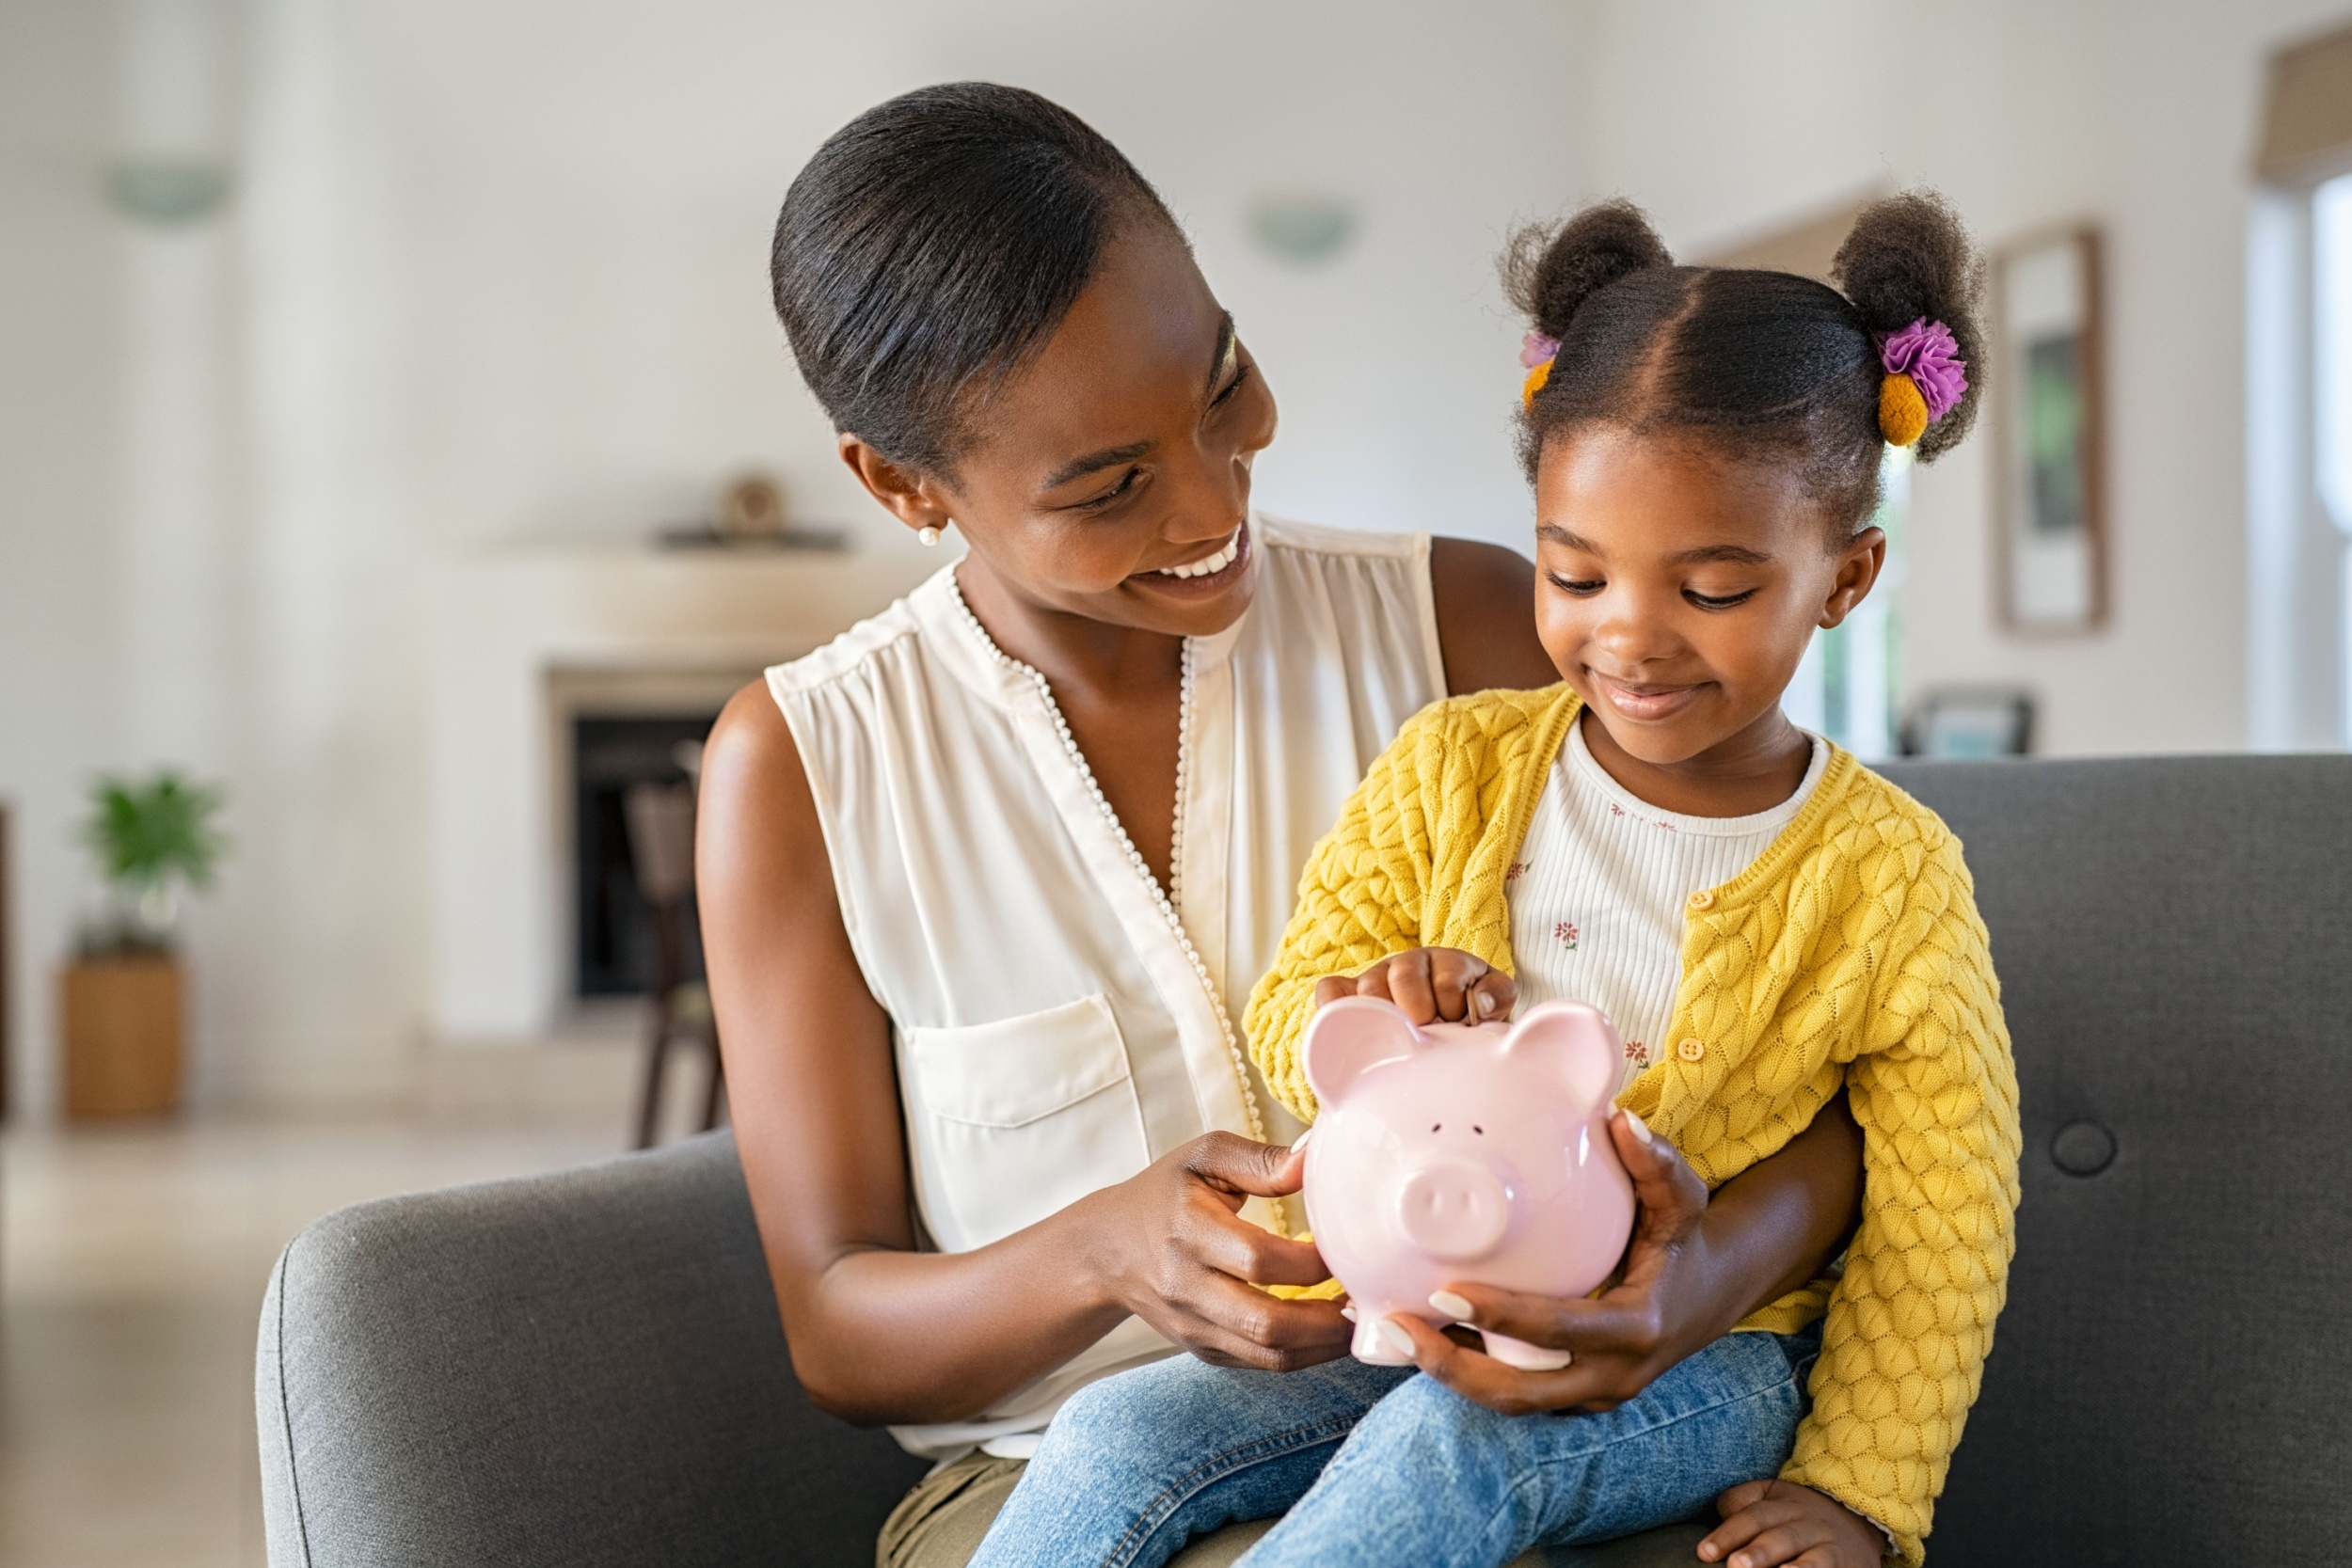 A woman with her child on her knee holding a piggy bank.